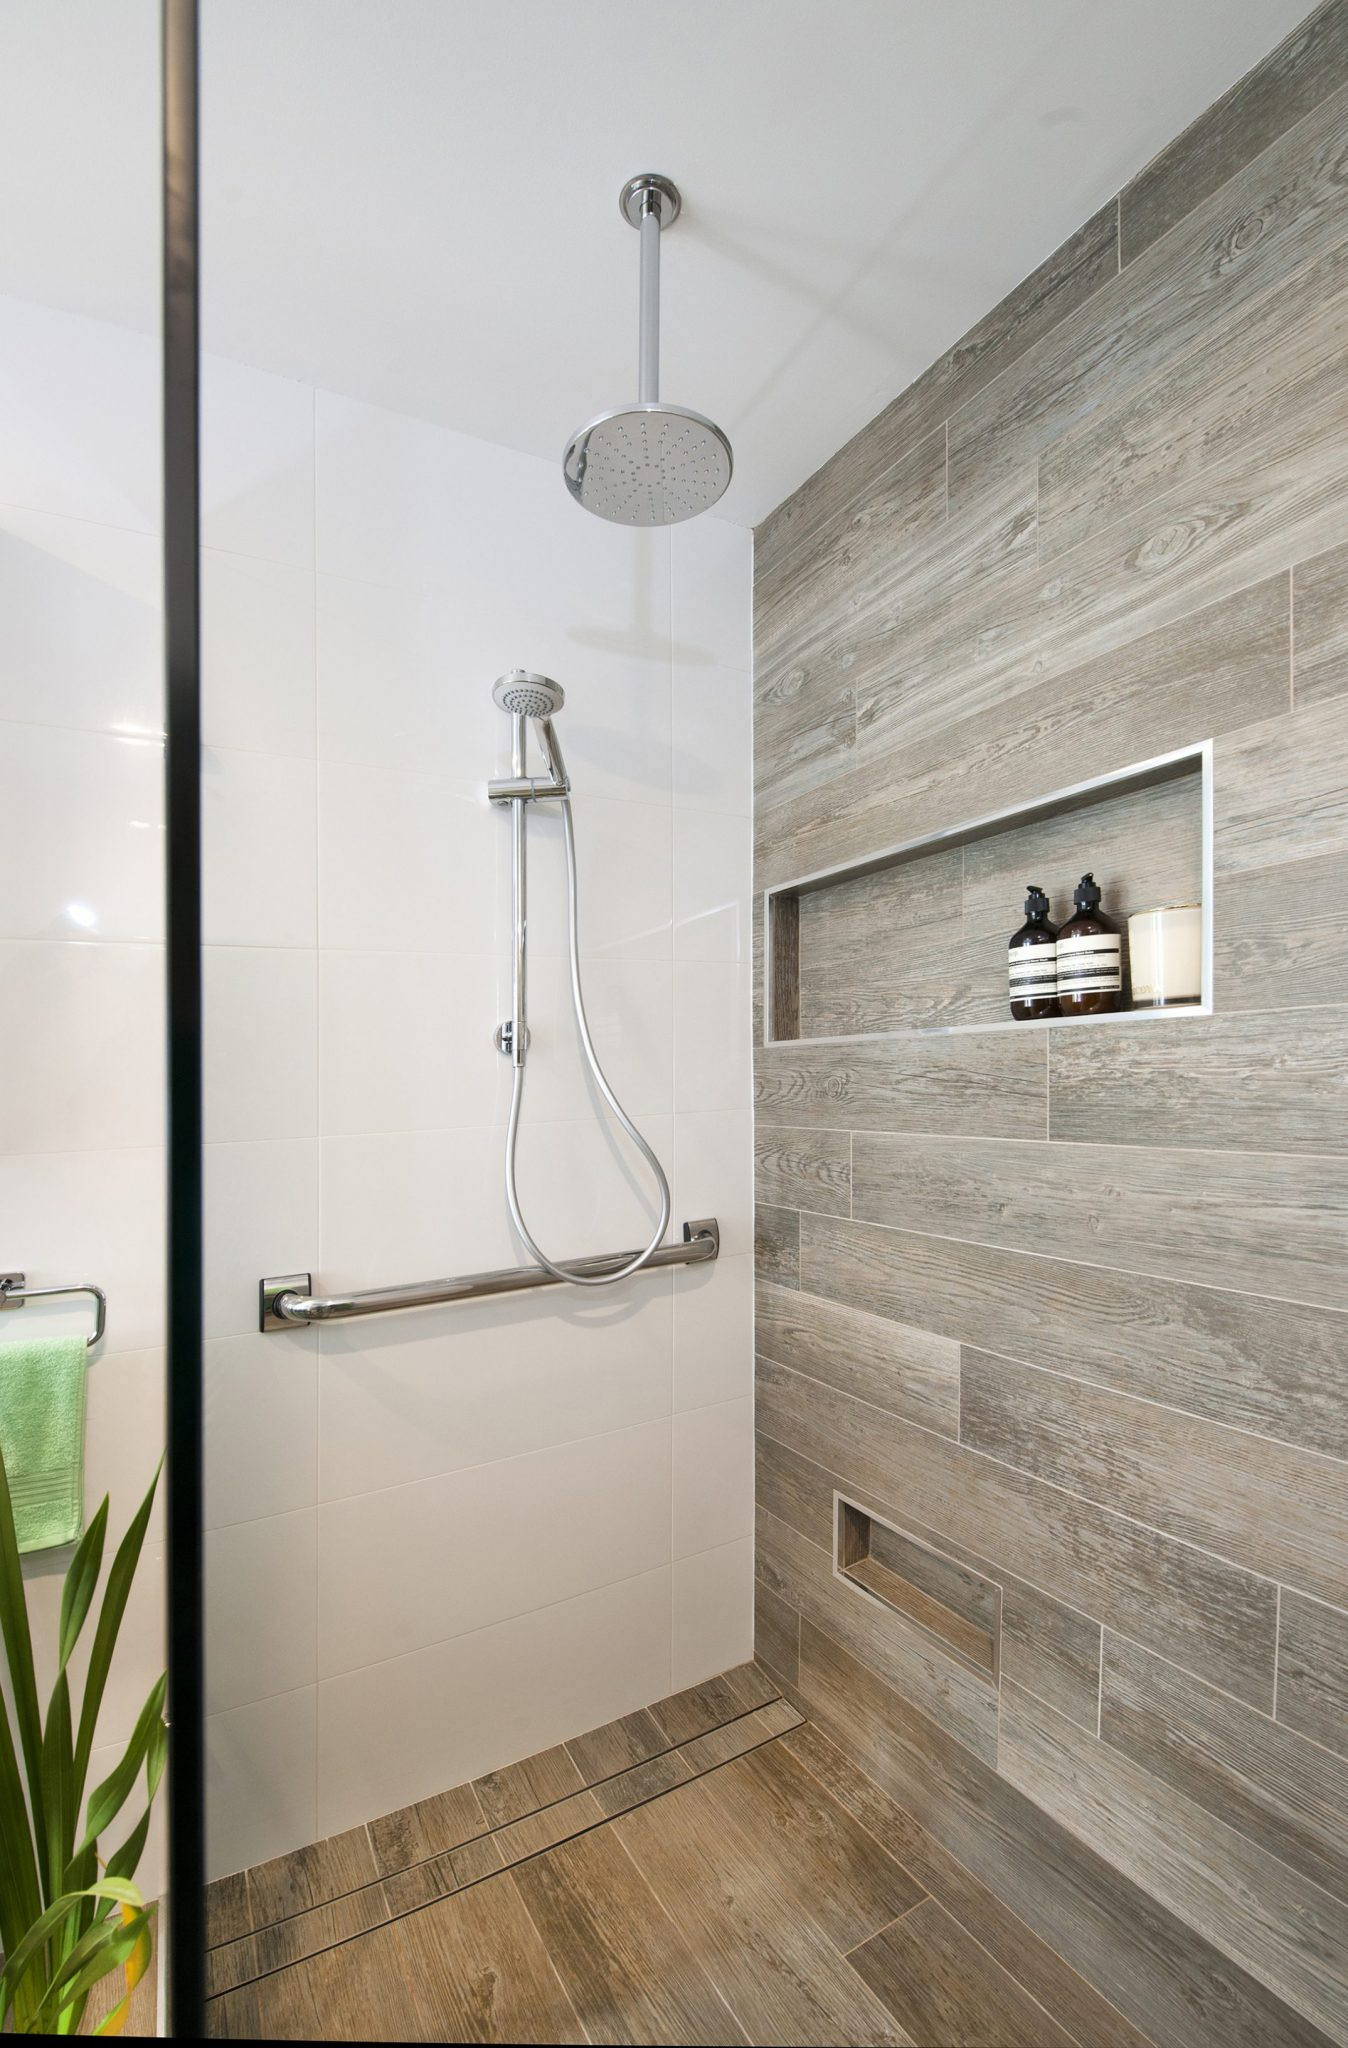 Tiling Bathroom Wall
 Ore’s tips for selecting a bathroom feature wall – Life s